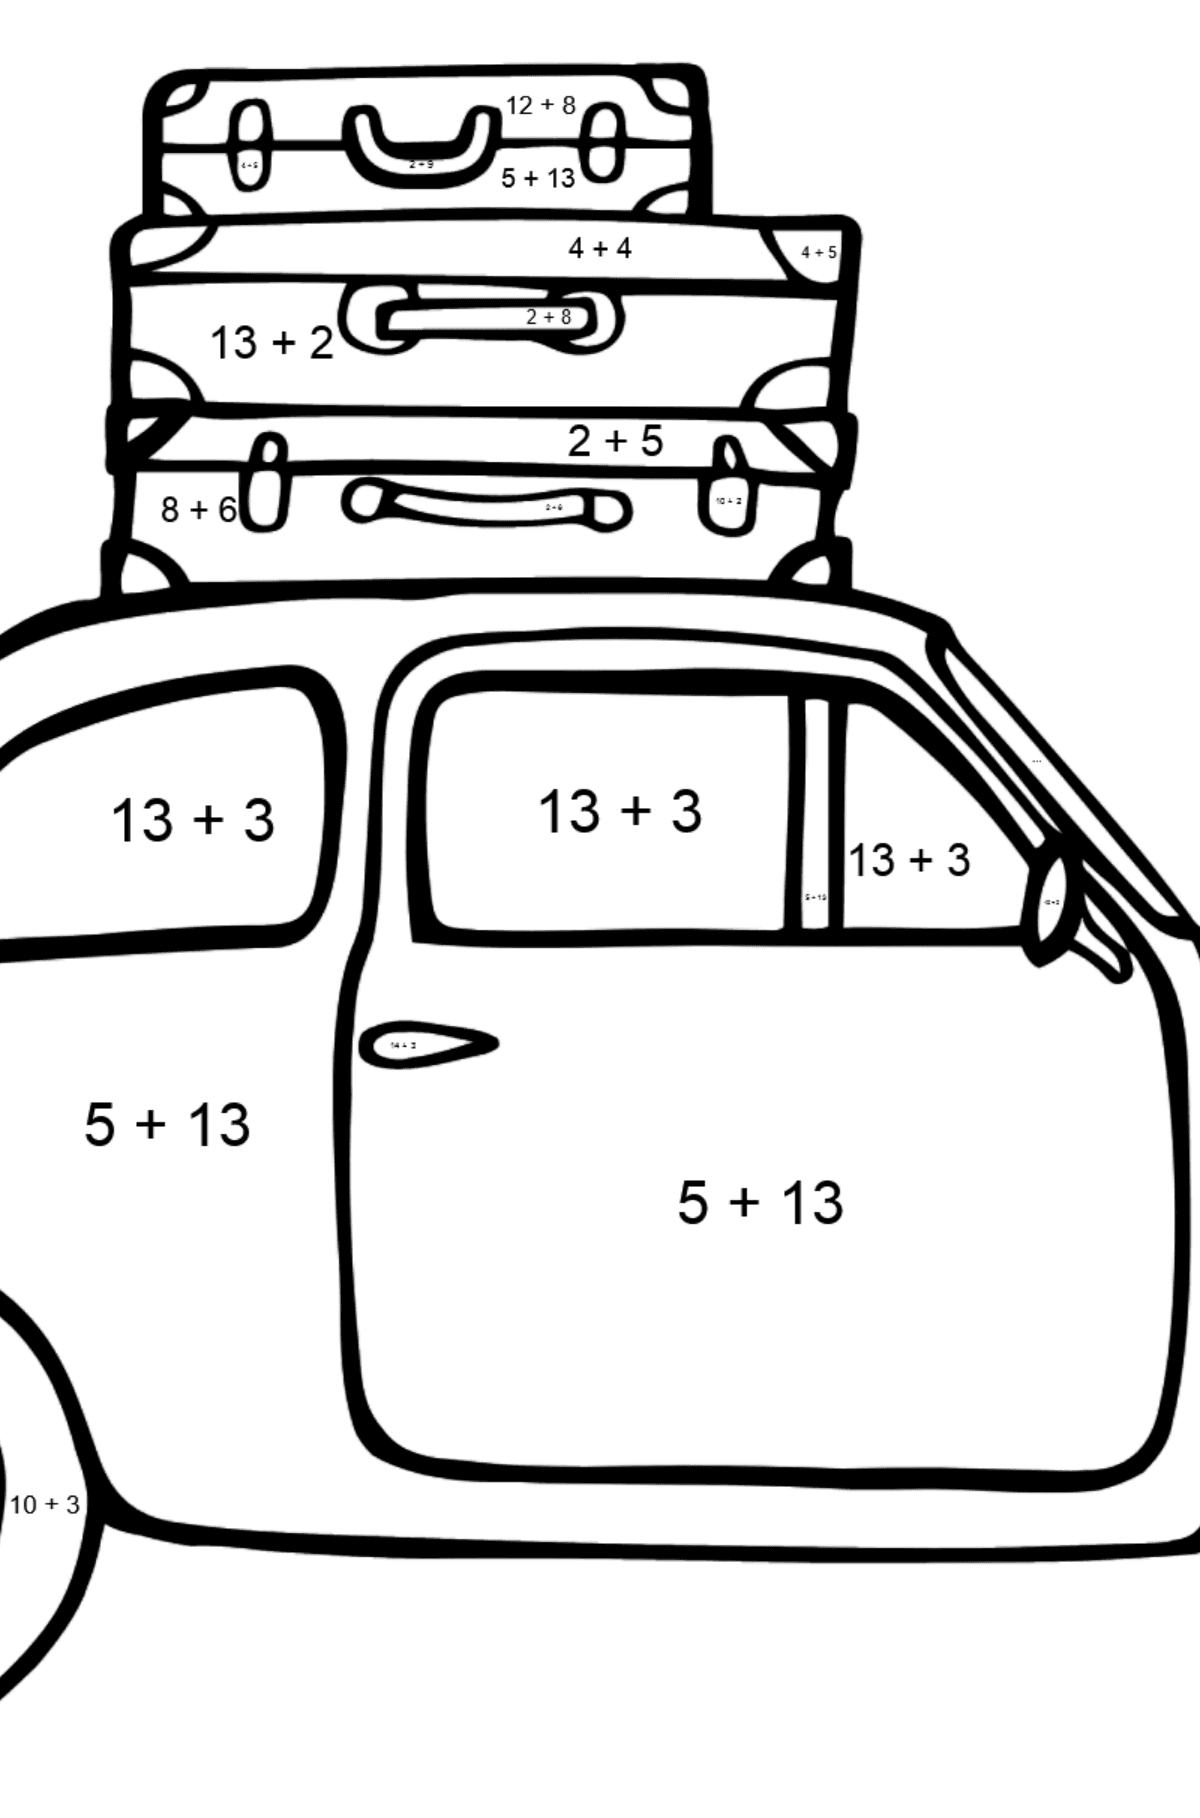 Fiat 500 car coloring page - Math Coloring - Addition for Kids